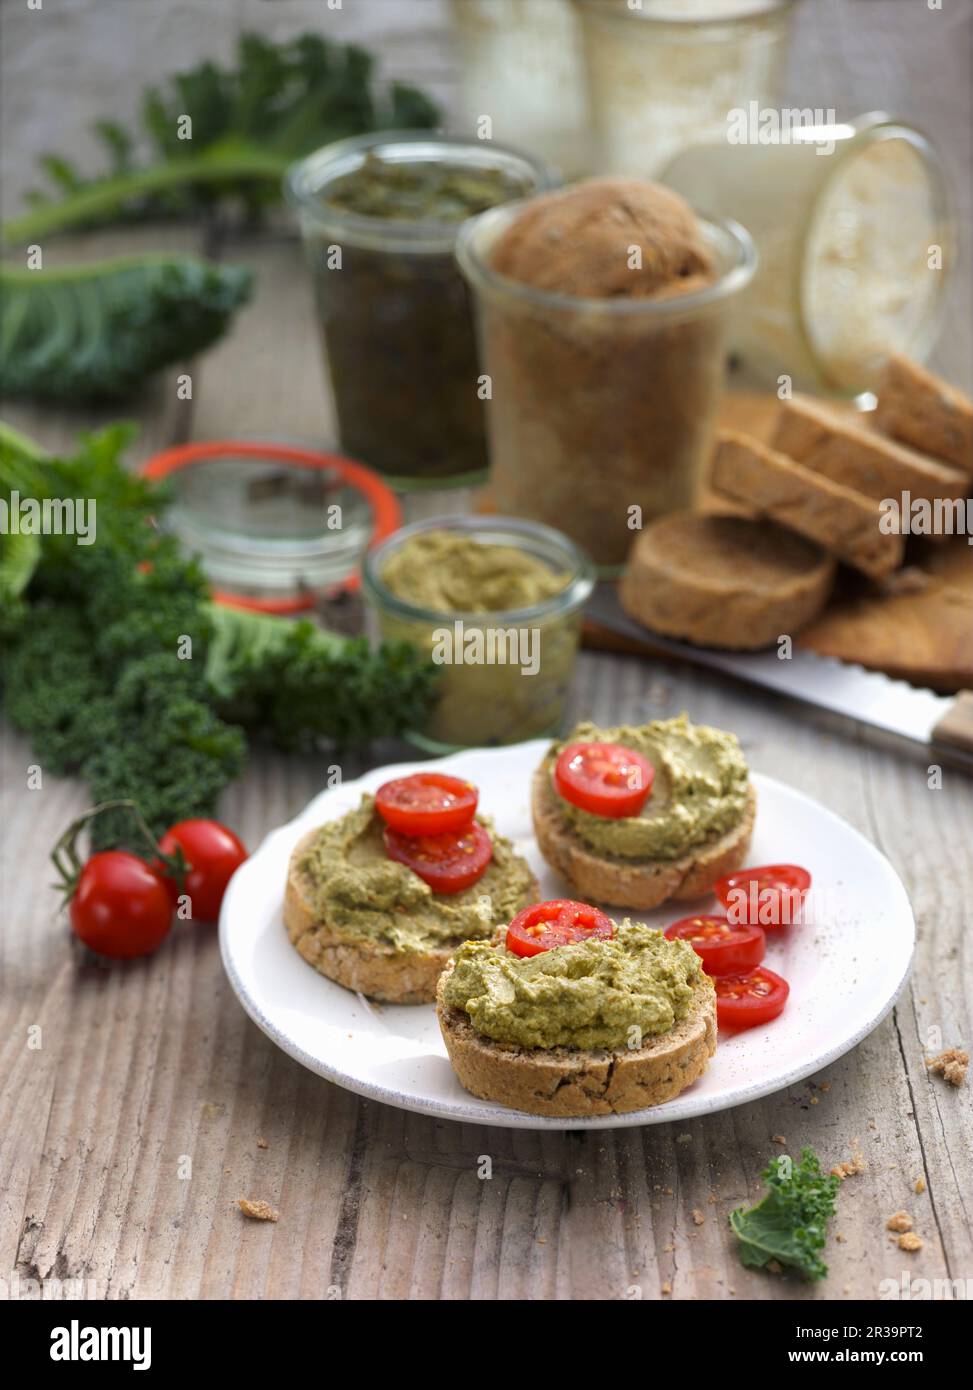 Kale cream and cherry tomatoes on country bread Stock Photo